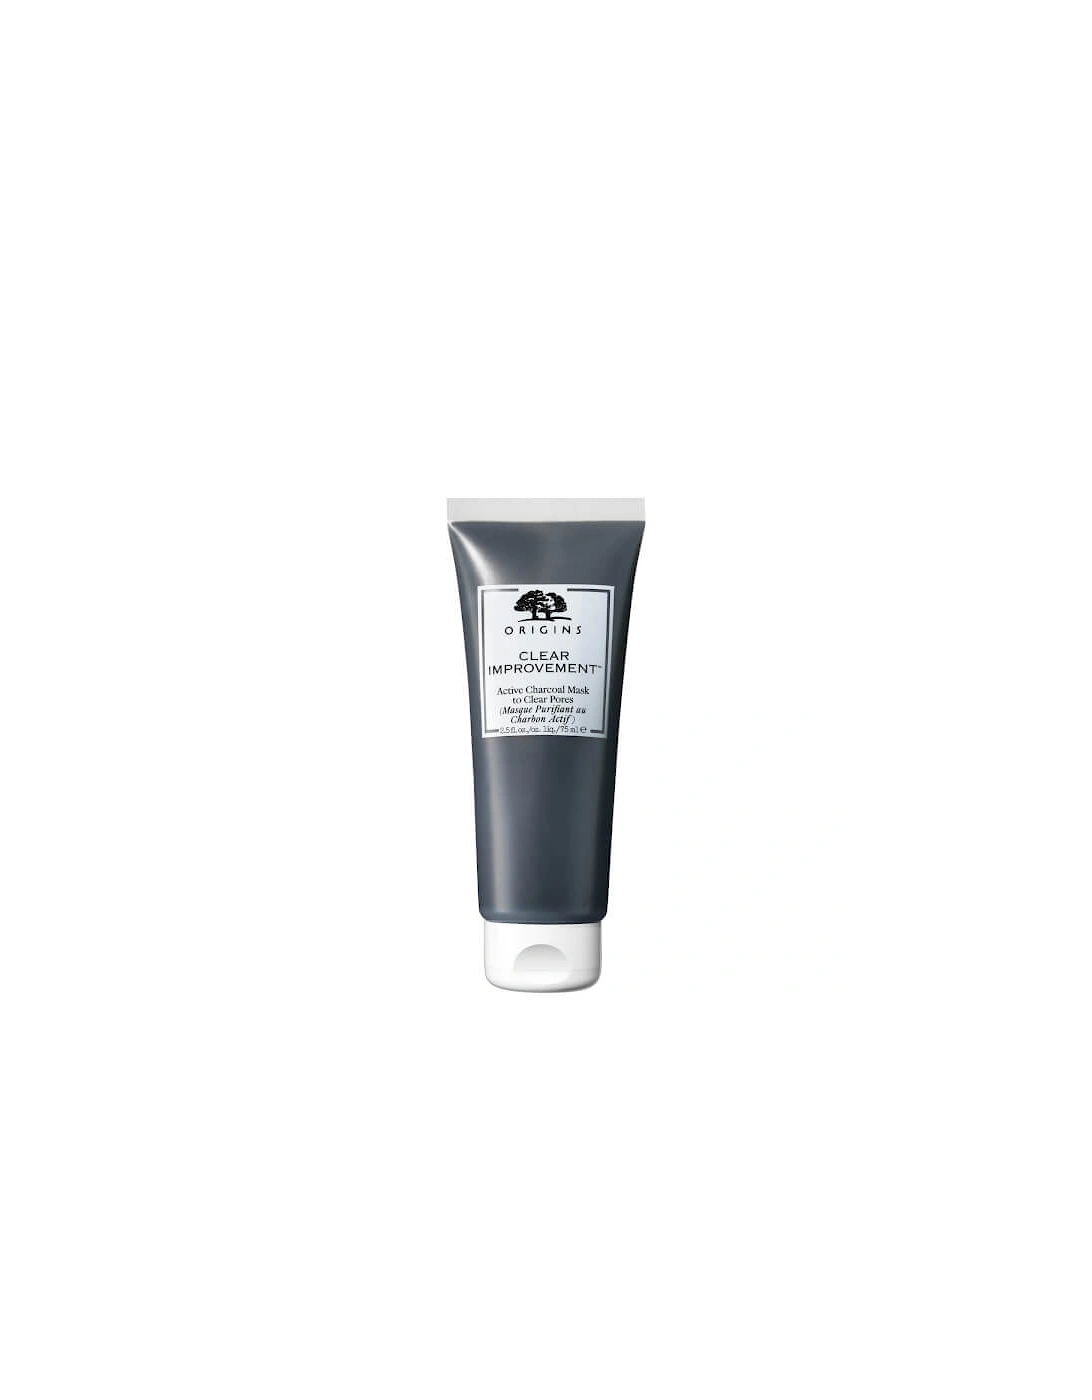 Clear Improvement Active Charcoal Mask to Clear Pores 75ml, 2 of 1